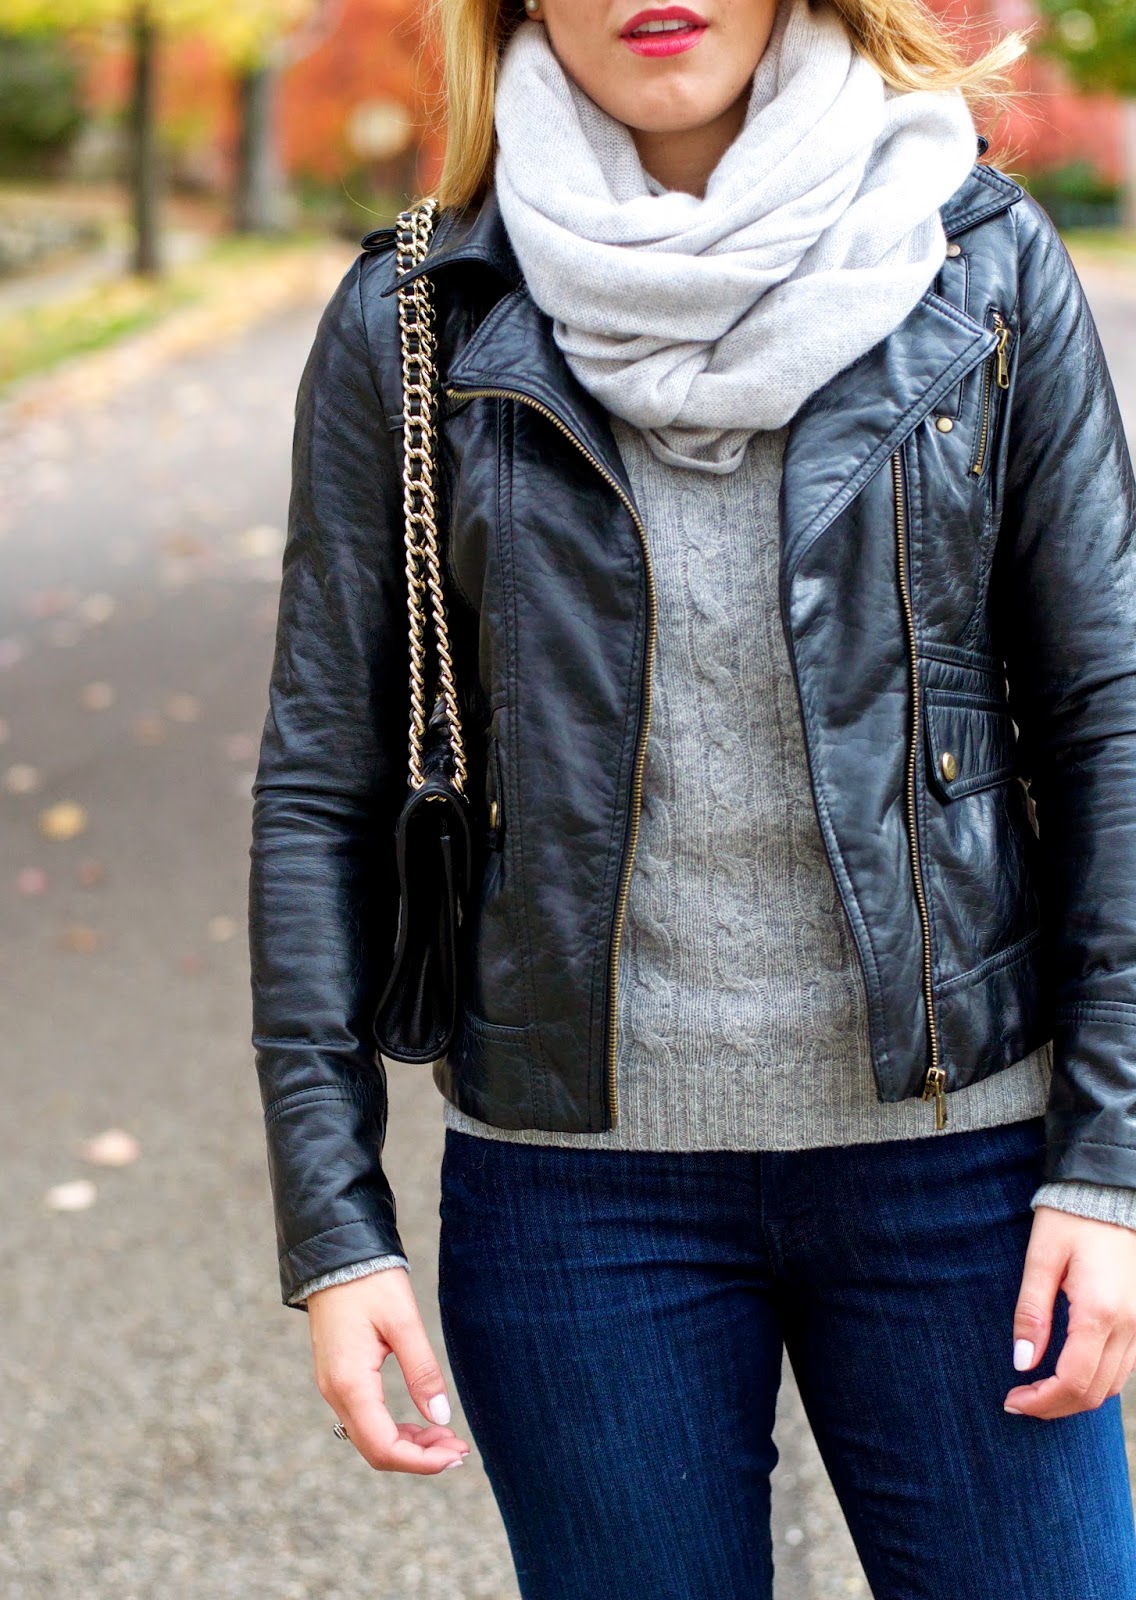 Summer Wind: Bad to the Bone: Styling a Leather Jacket